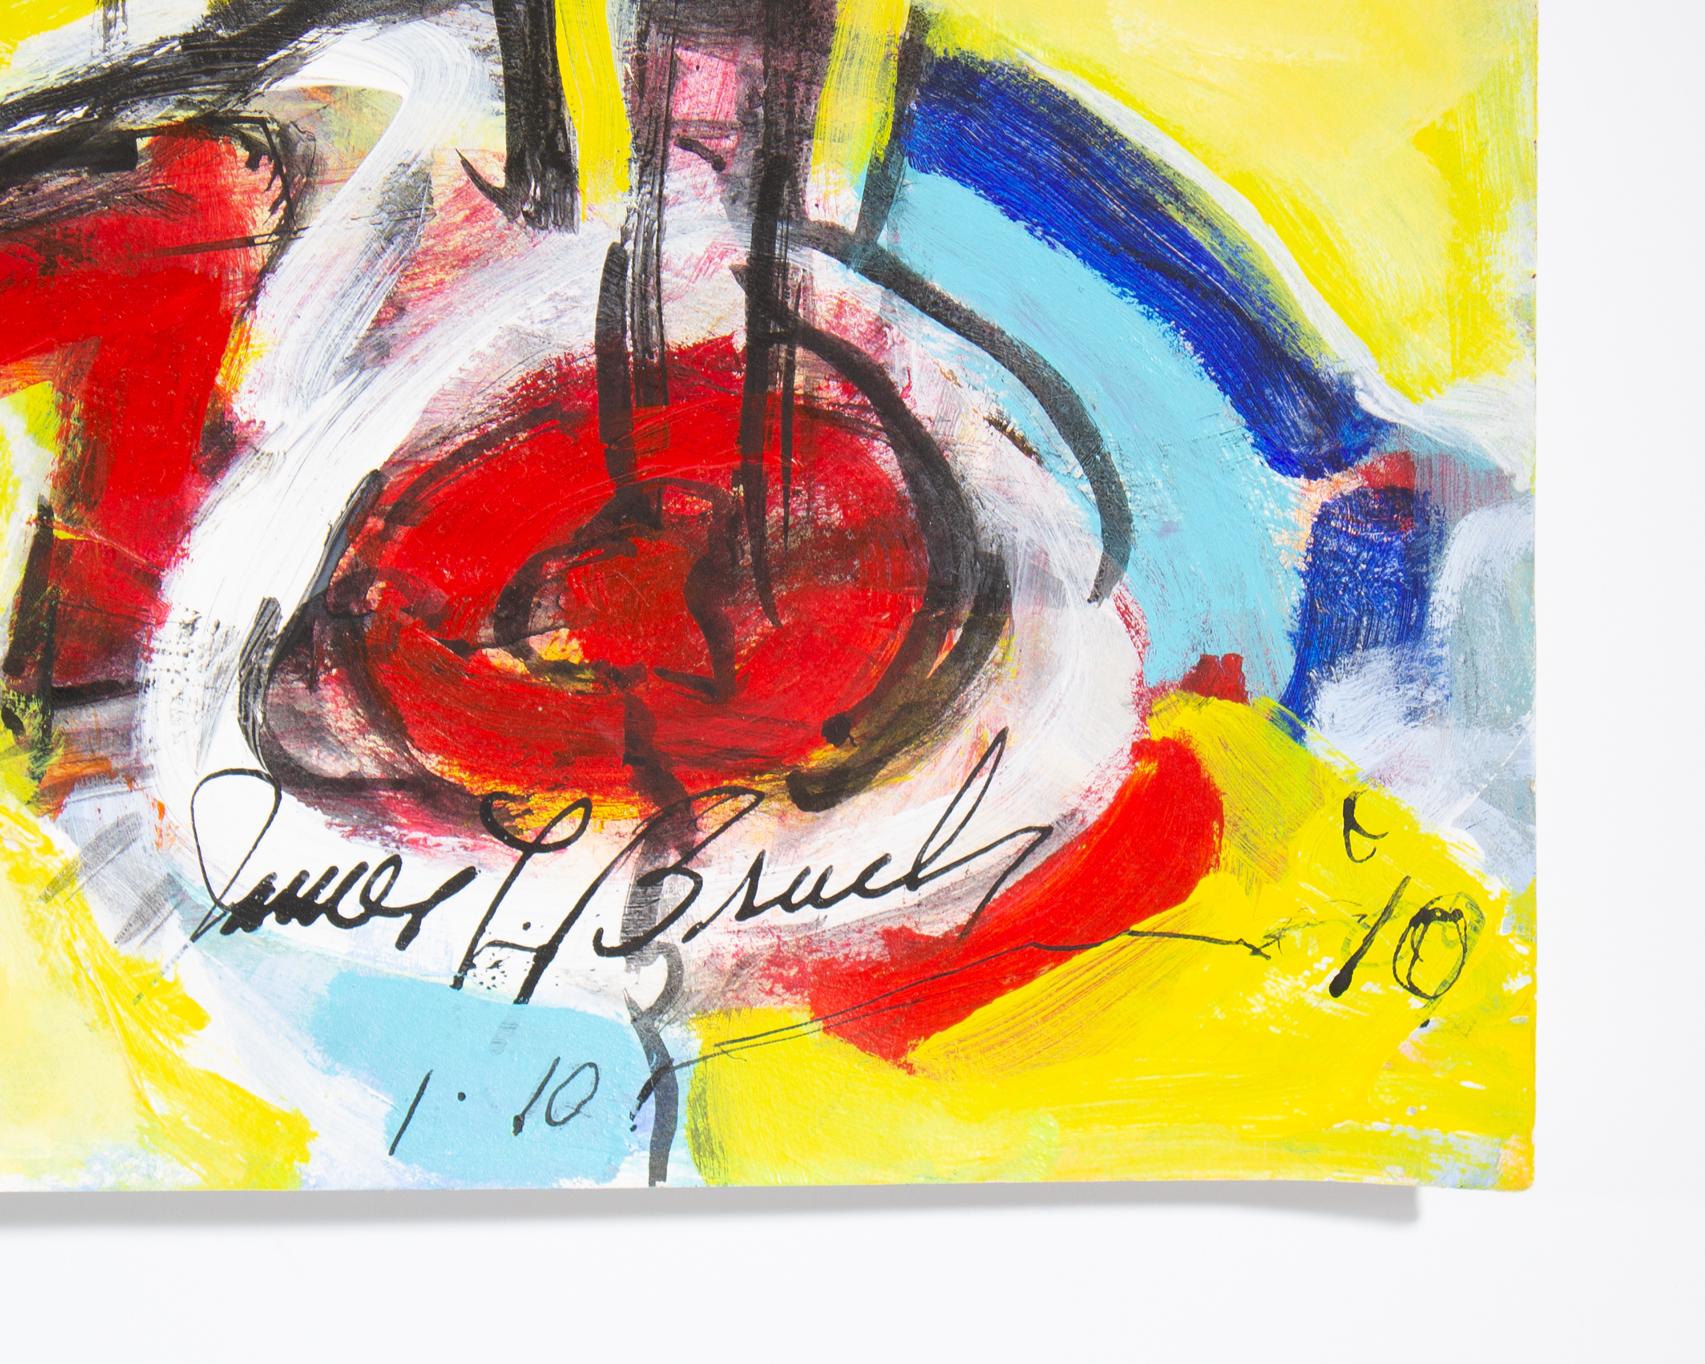 American James L. Bruch Signed 2010 “Life’s Rich Pageantry” Abstract Acrylic Painting For Sale